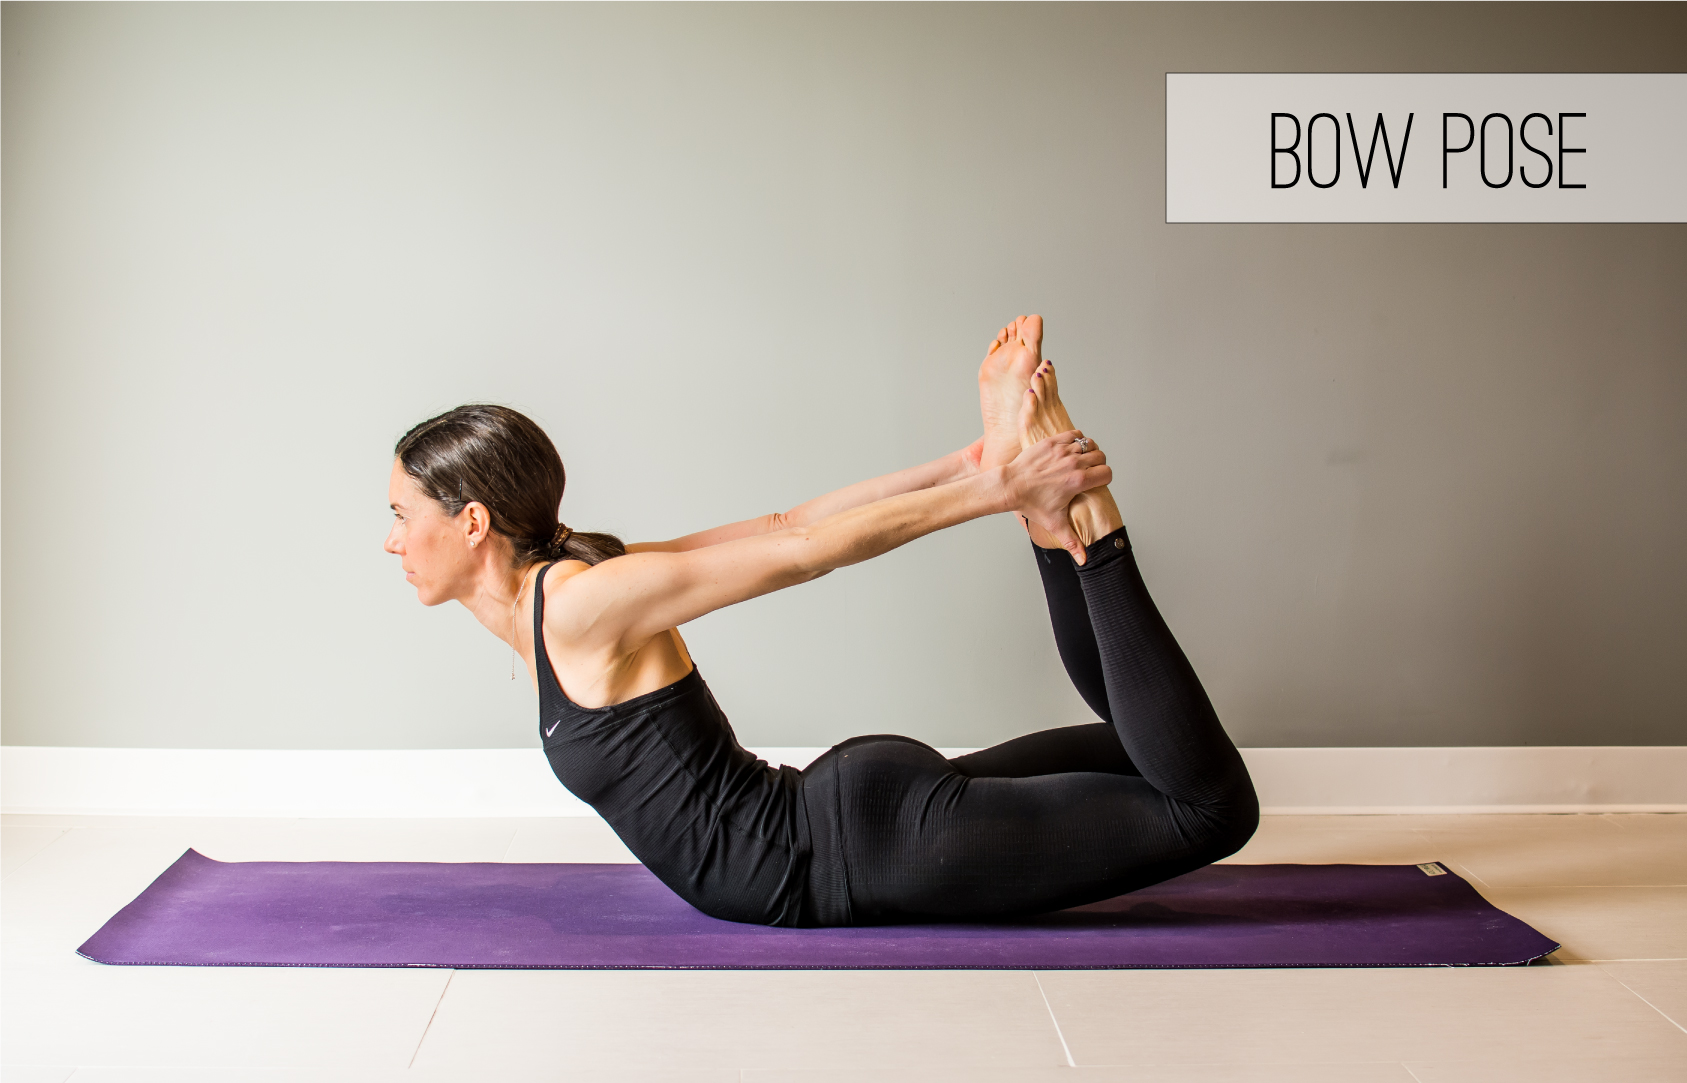 Practice These 10 Yoga Poses to Correct Bad Posture | YouAligned